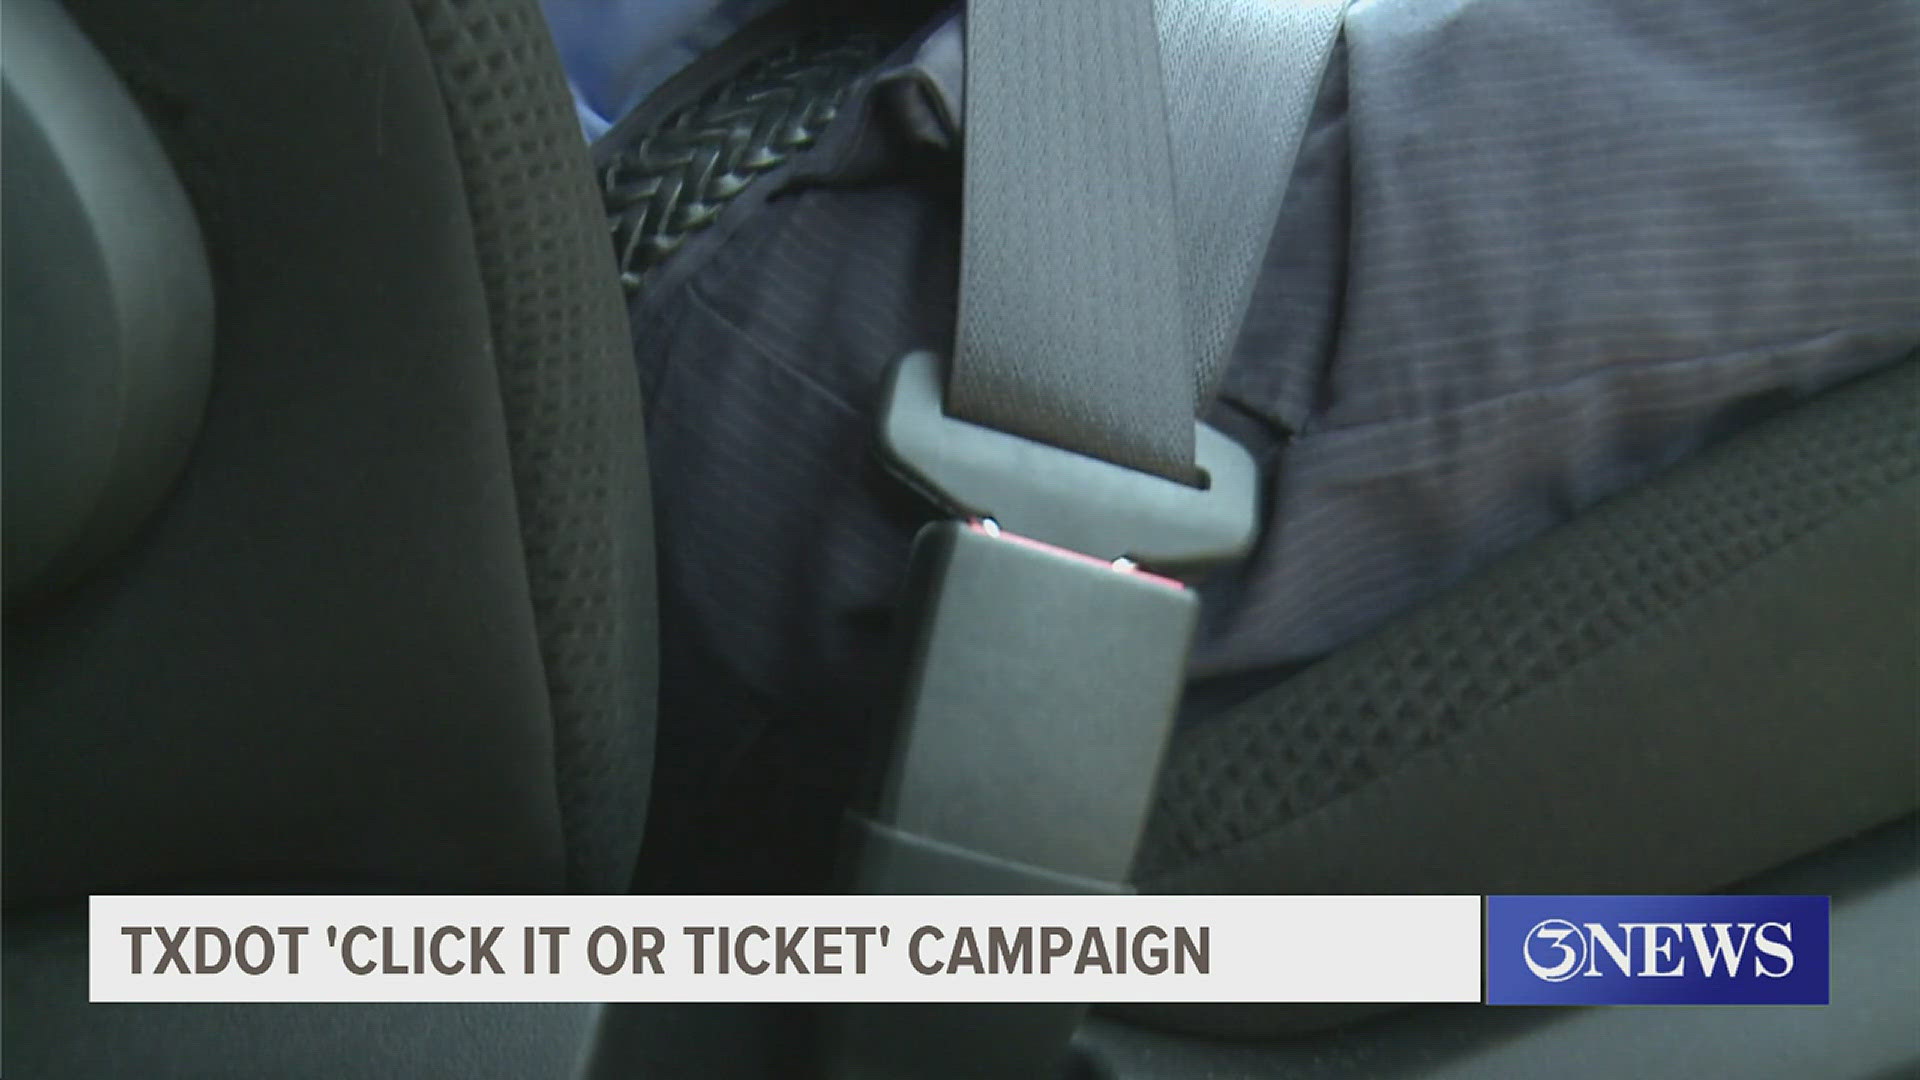 Texas law requires everyone in a vehicle to buckle up or face fines and court costs up to $200.